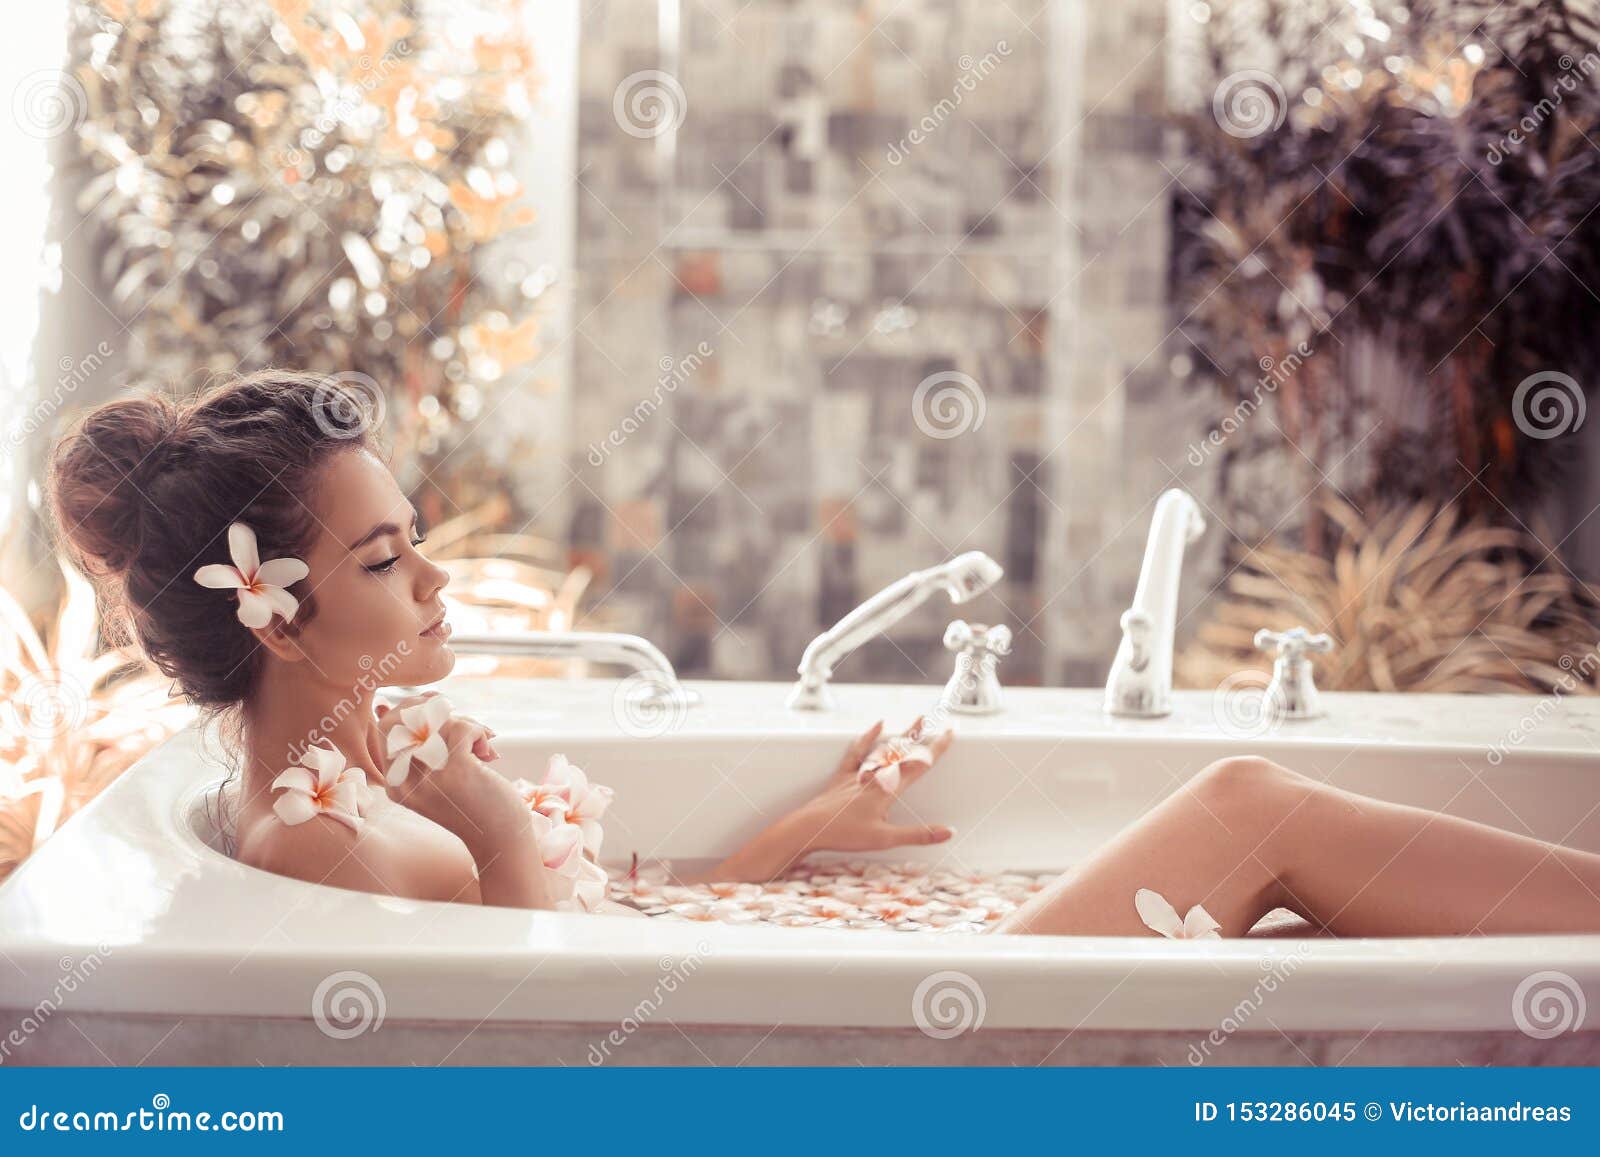 pretty girl enjoying bath with plumeria tropical flowers. health and beauty. spa relax. closeup beautiful woman bathing with